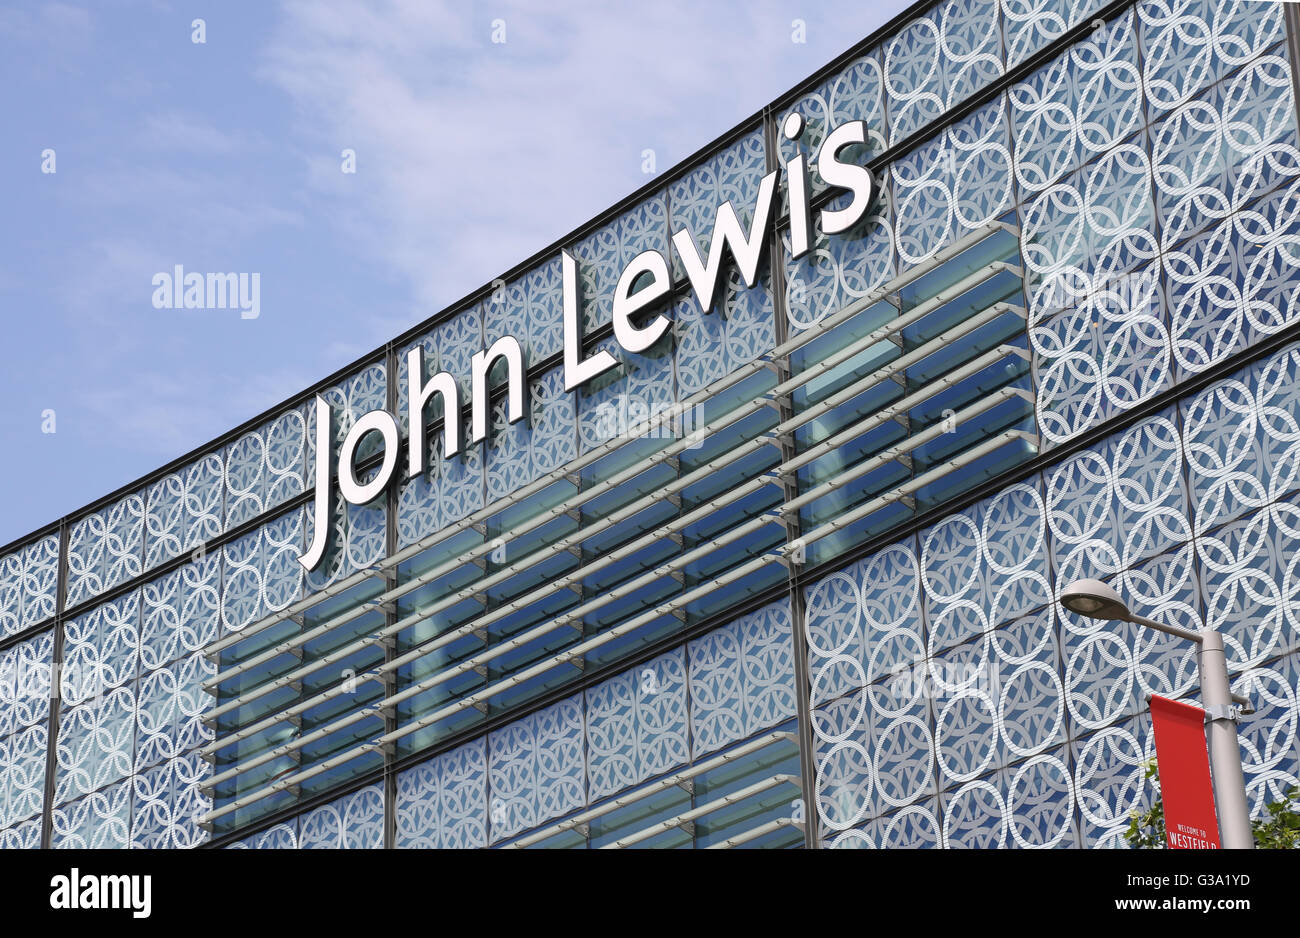 Exterior view of the John Lewis store at the Westfield Stratford shopping mall in London, UK. Close-up of logo on glazed facade Stock Photo